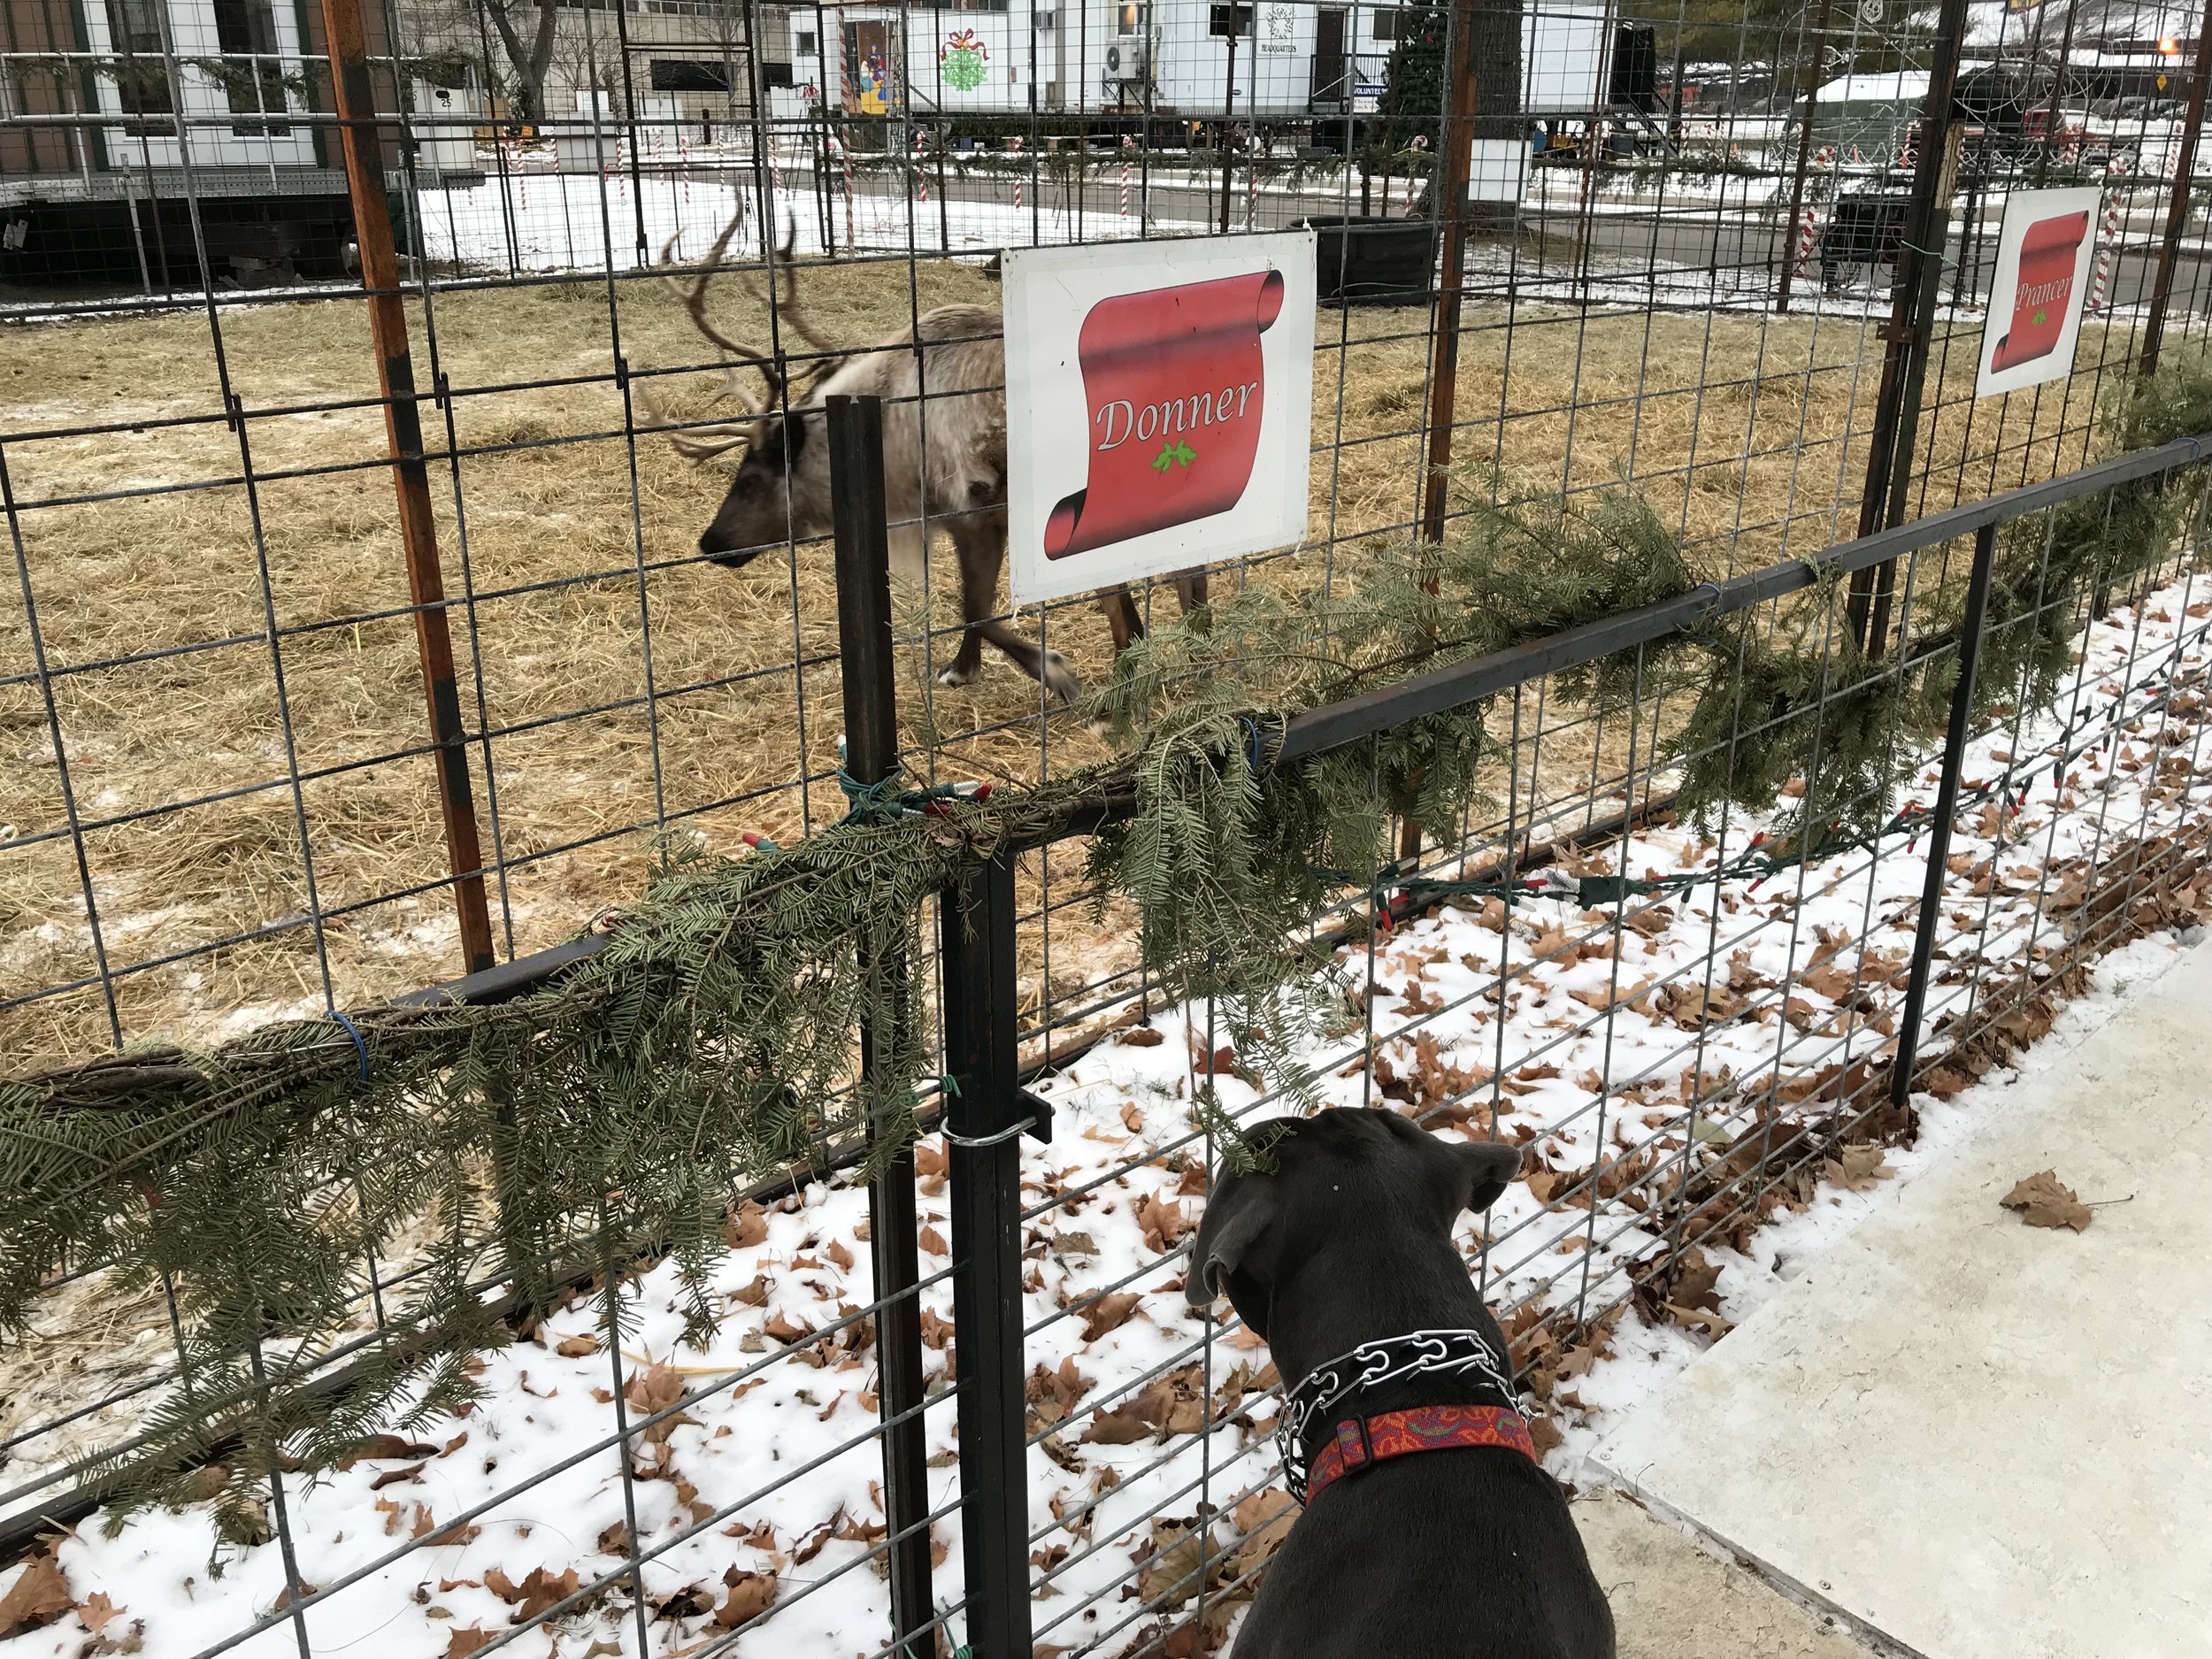 Holiday decorations in the park - La Crosse, WI - Live reindeer 